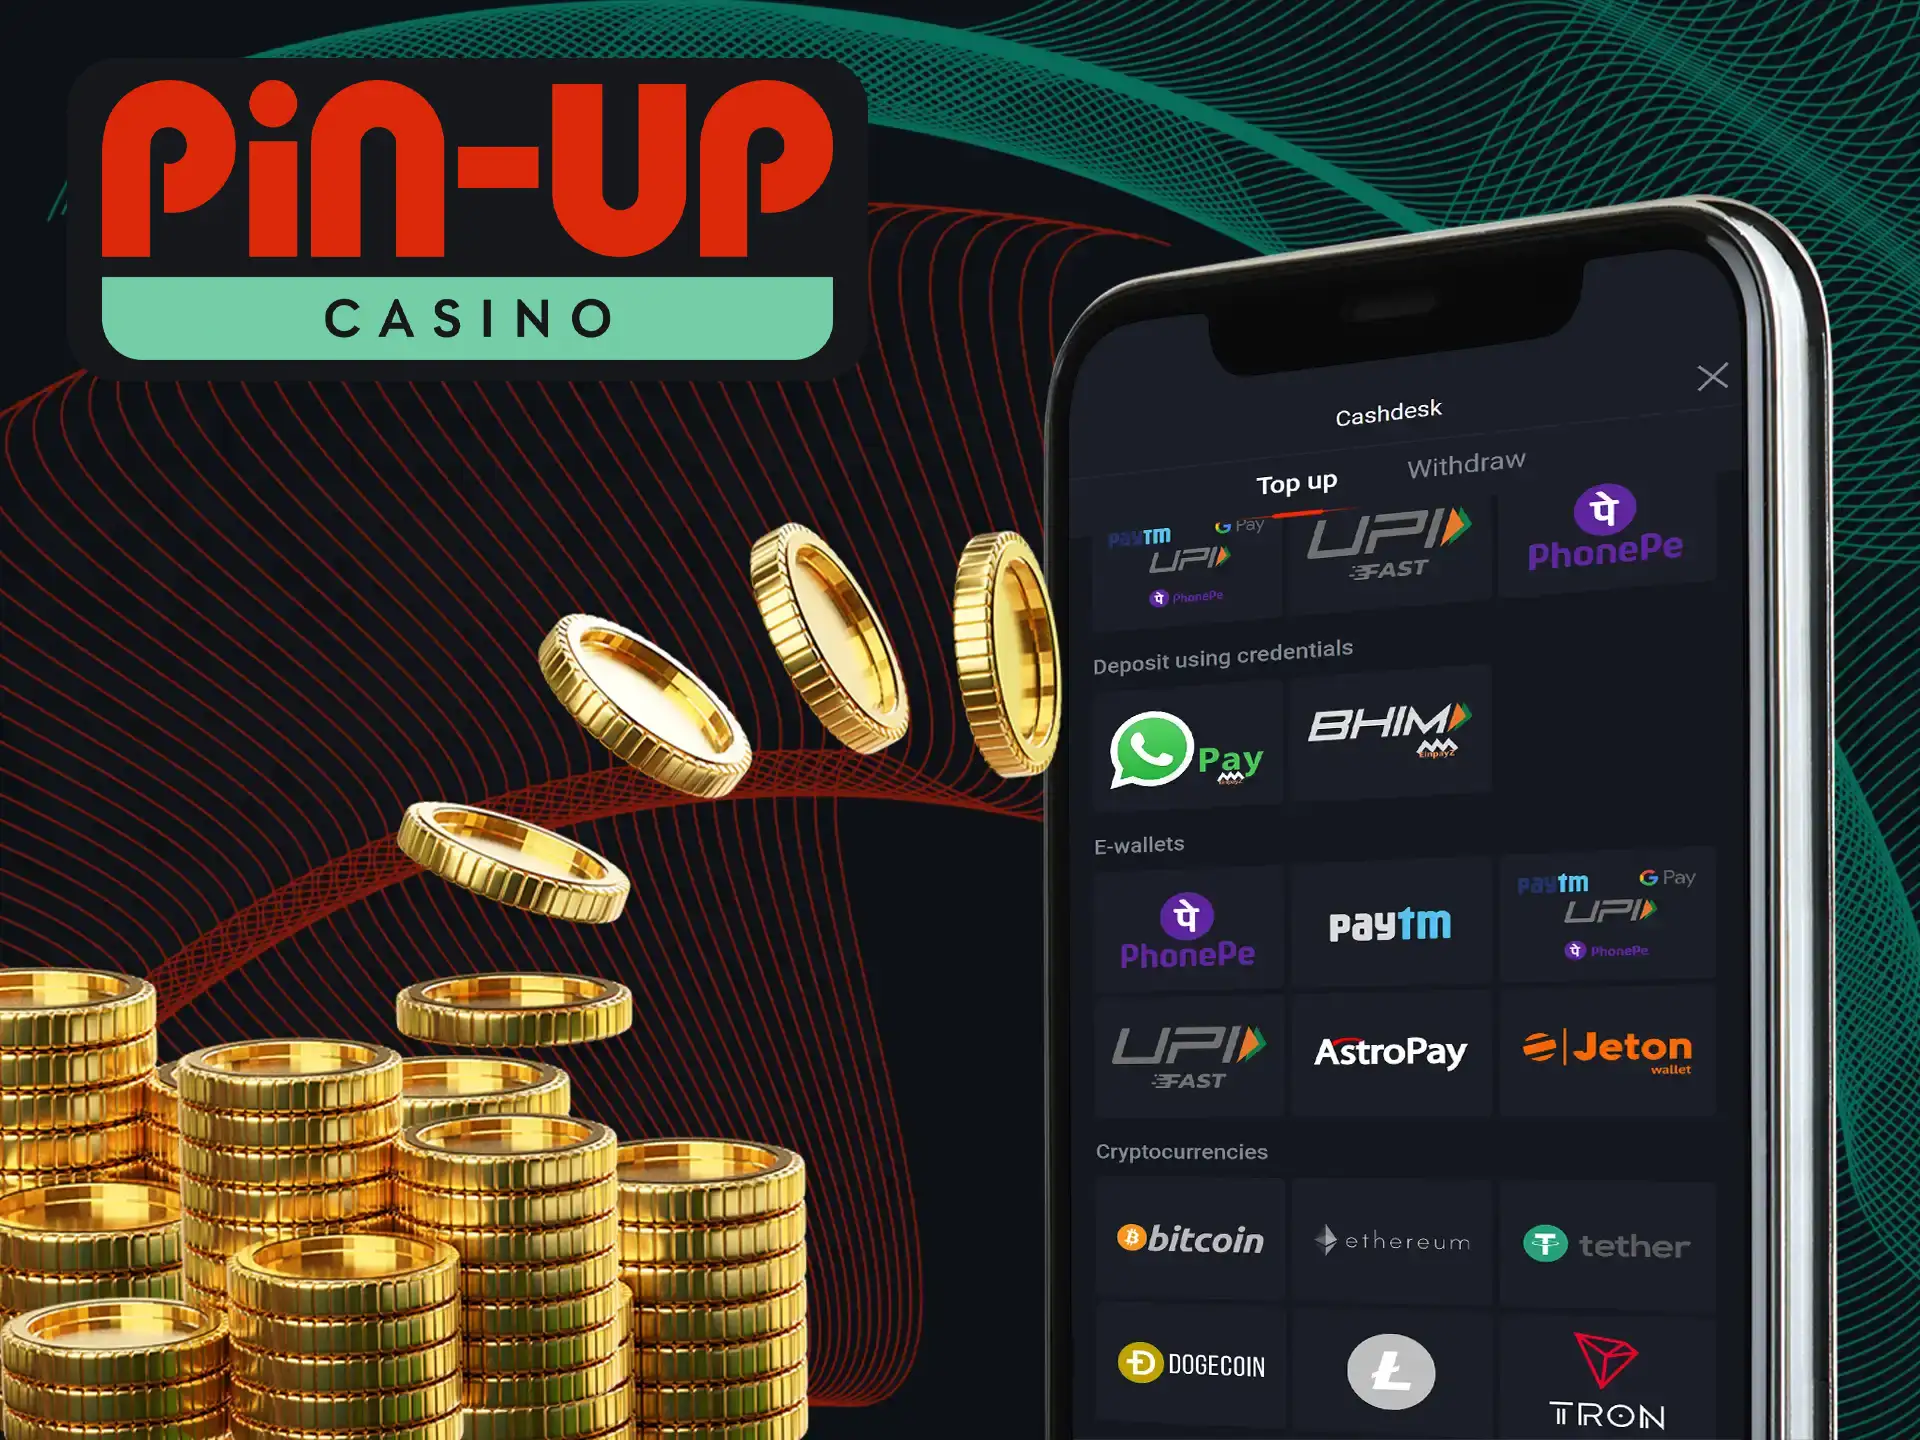 You have the option to deposit quickly and conveniently through the Pin-Up Casino app.